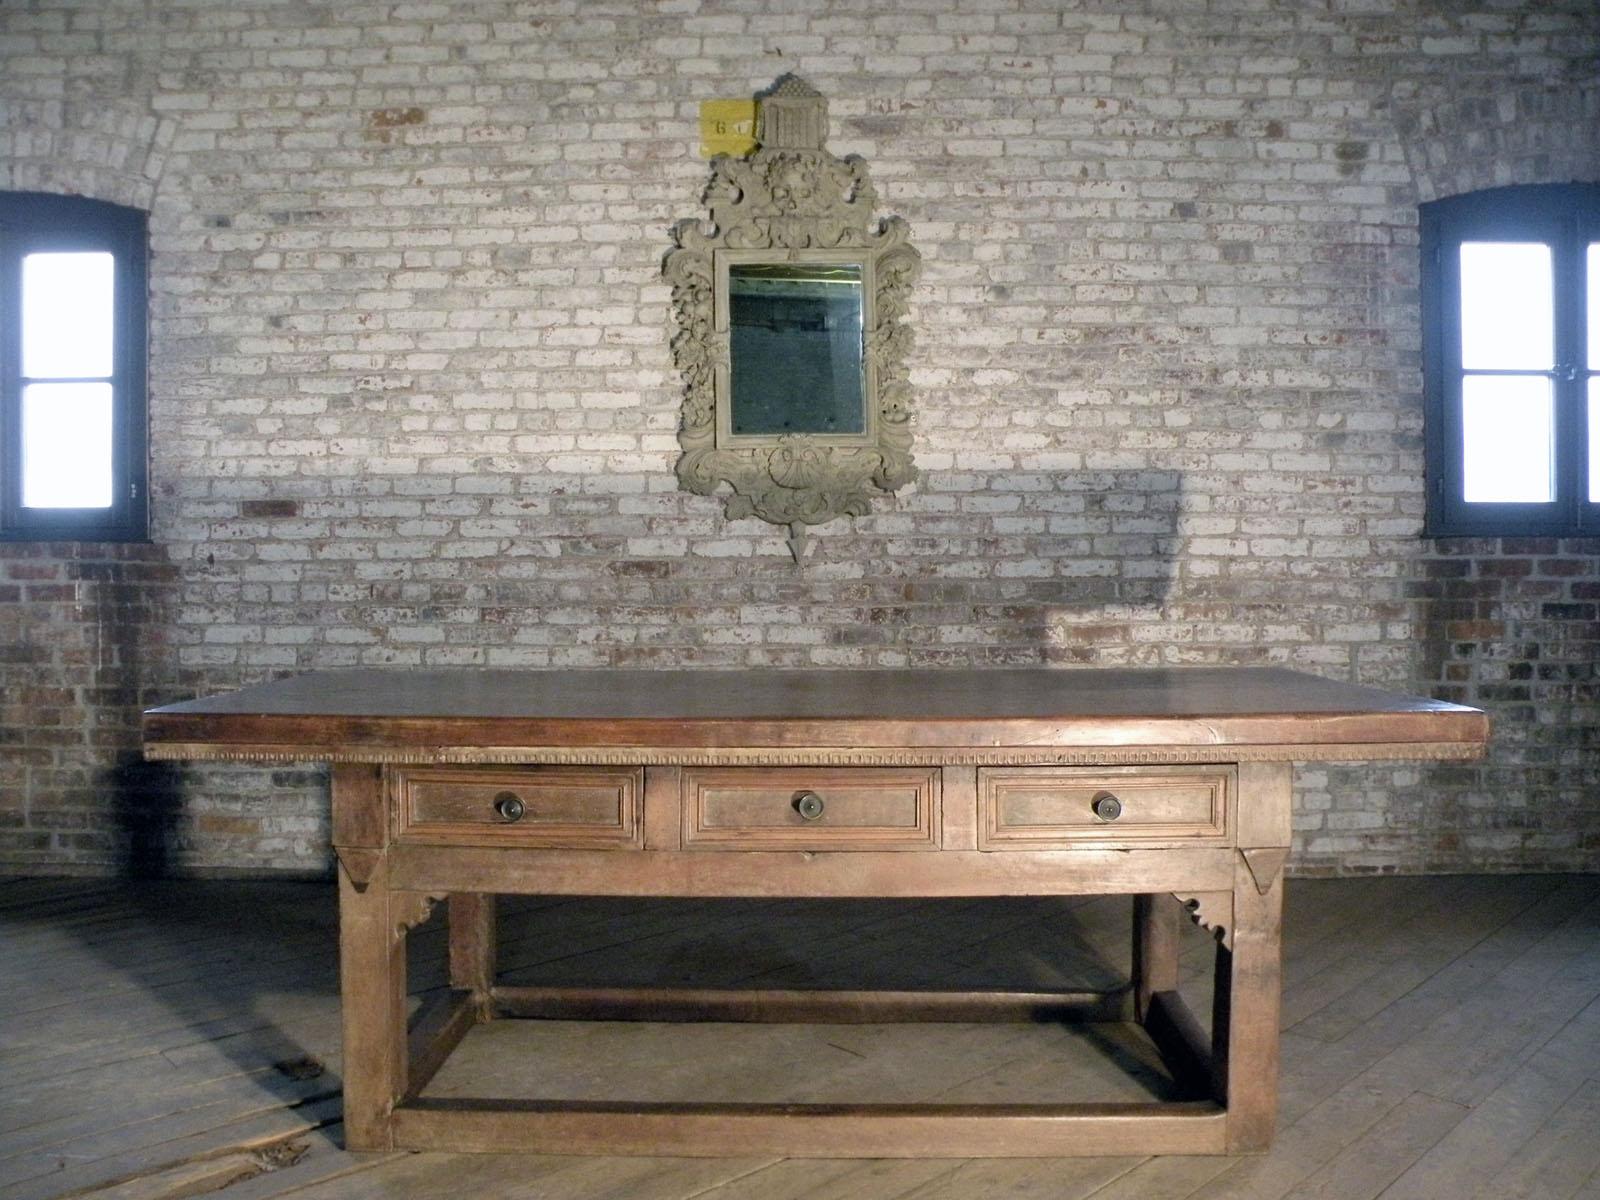 Extraordinary, large Italian Renaissance table of strong, linear design. The thick 2-plank top with a narrow dentil edge, above a frieze containing three drawers, supported by massive square legs joined by conforming, low box-stretchers. The strong